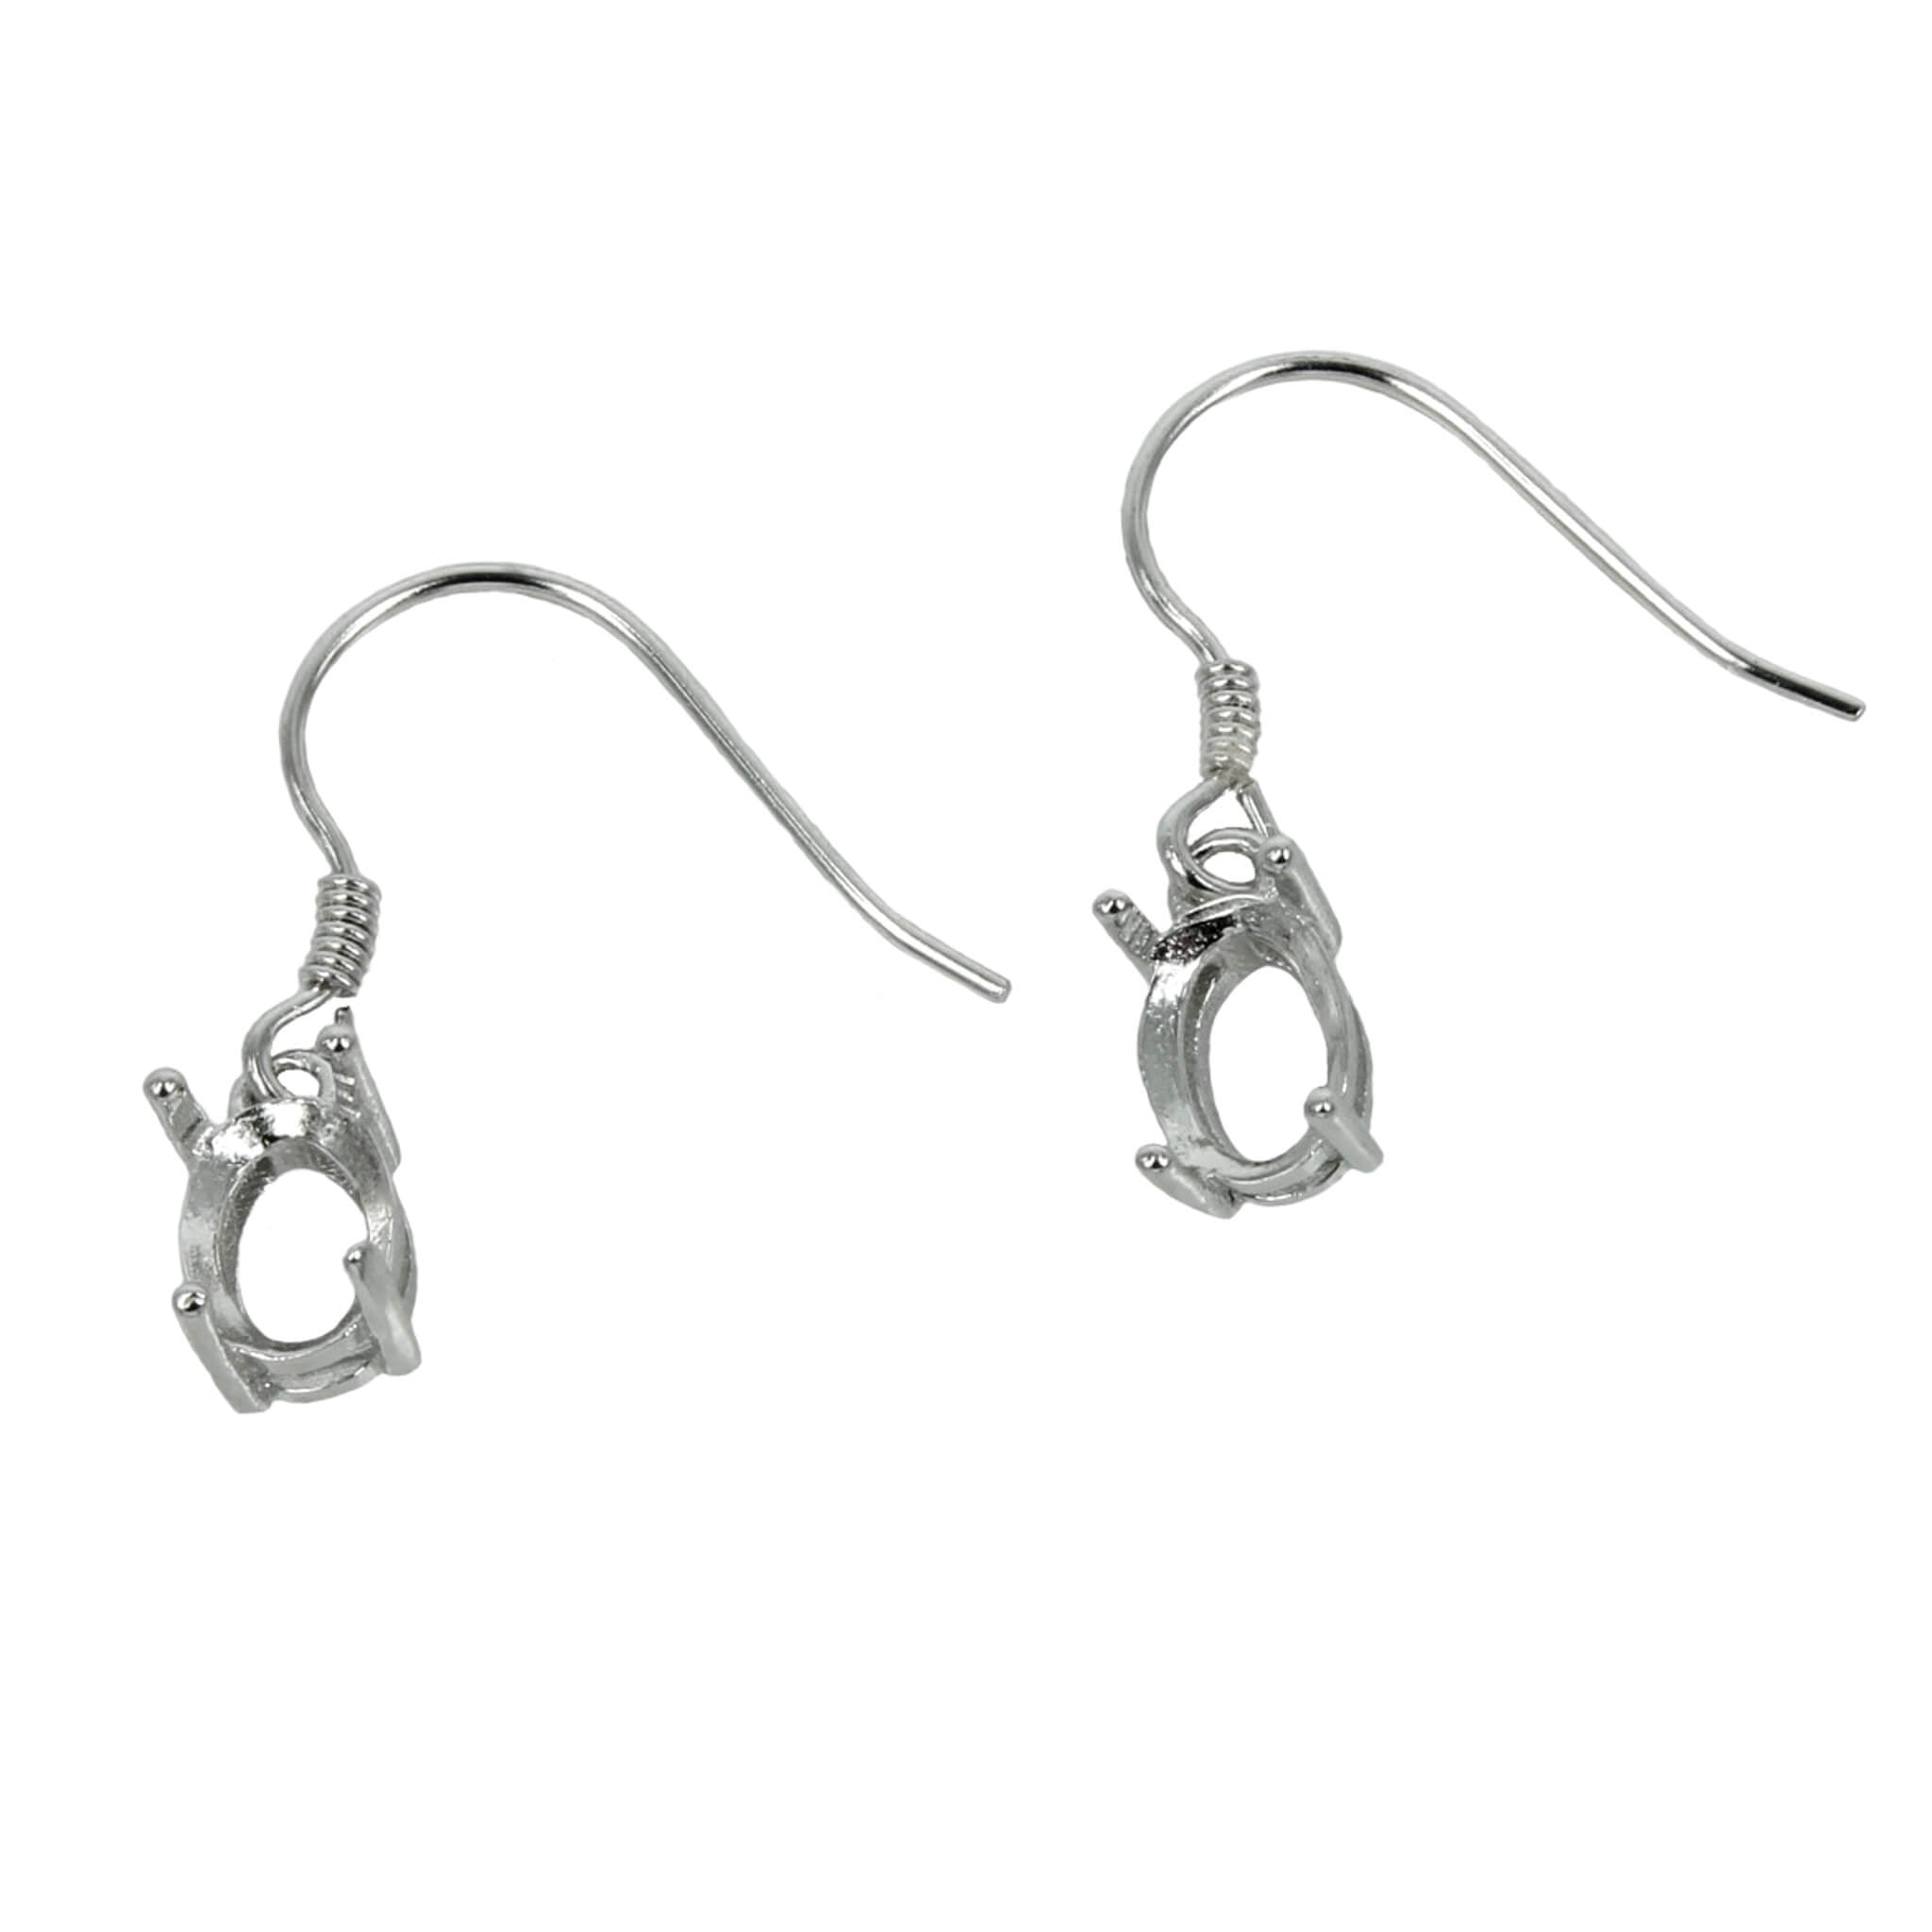 Ear Wires with Oval Basket Setting in Sterling Silver